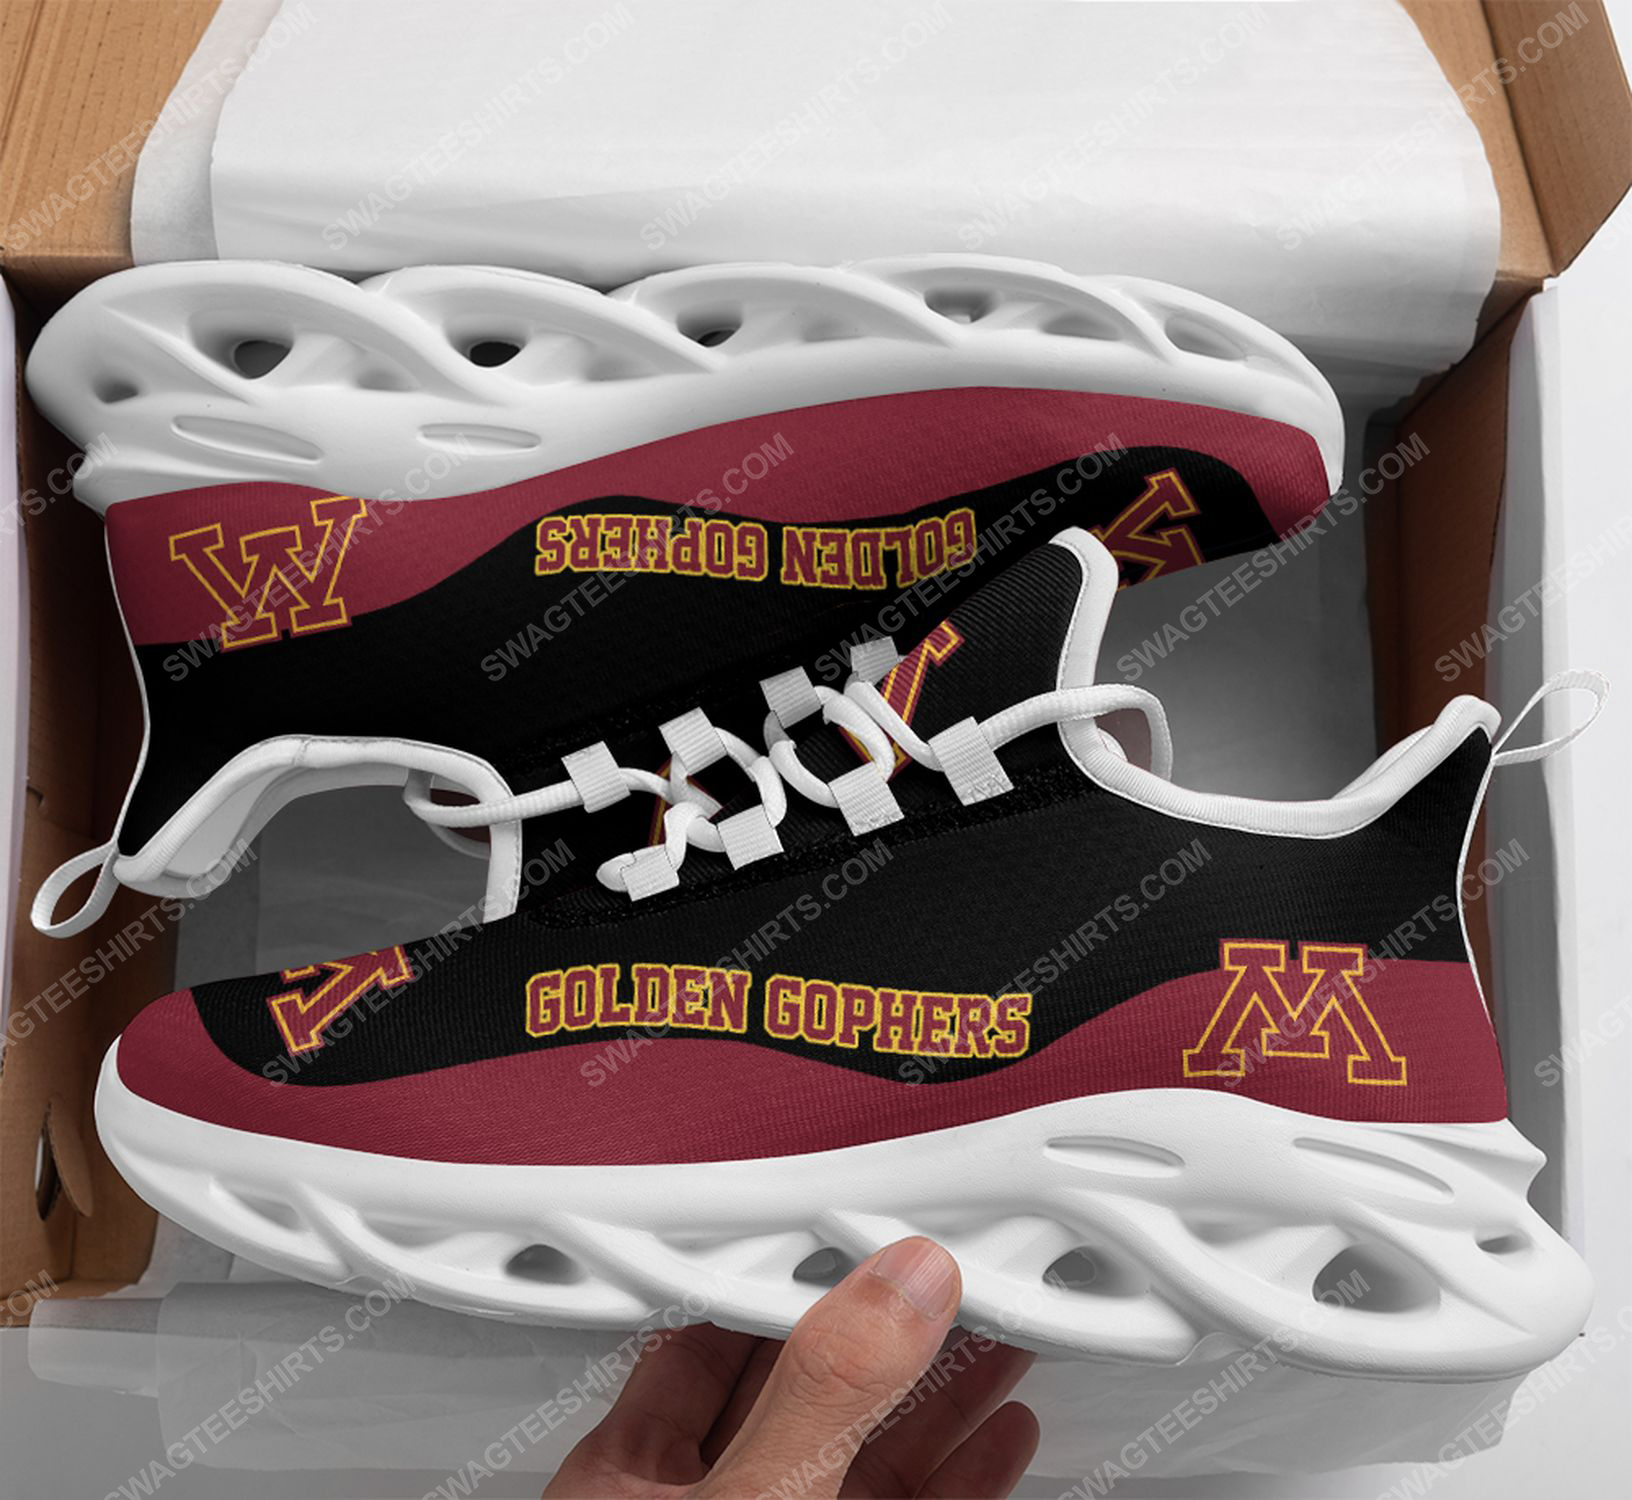 The minnesota golden gophers football team max soul shoes 1